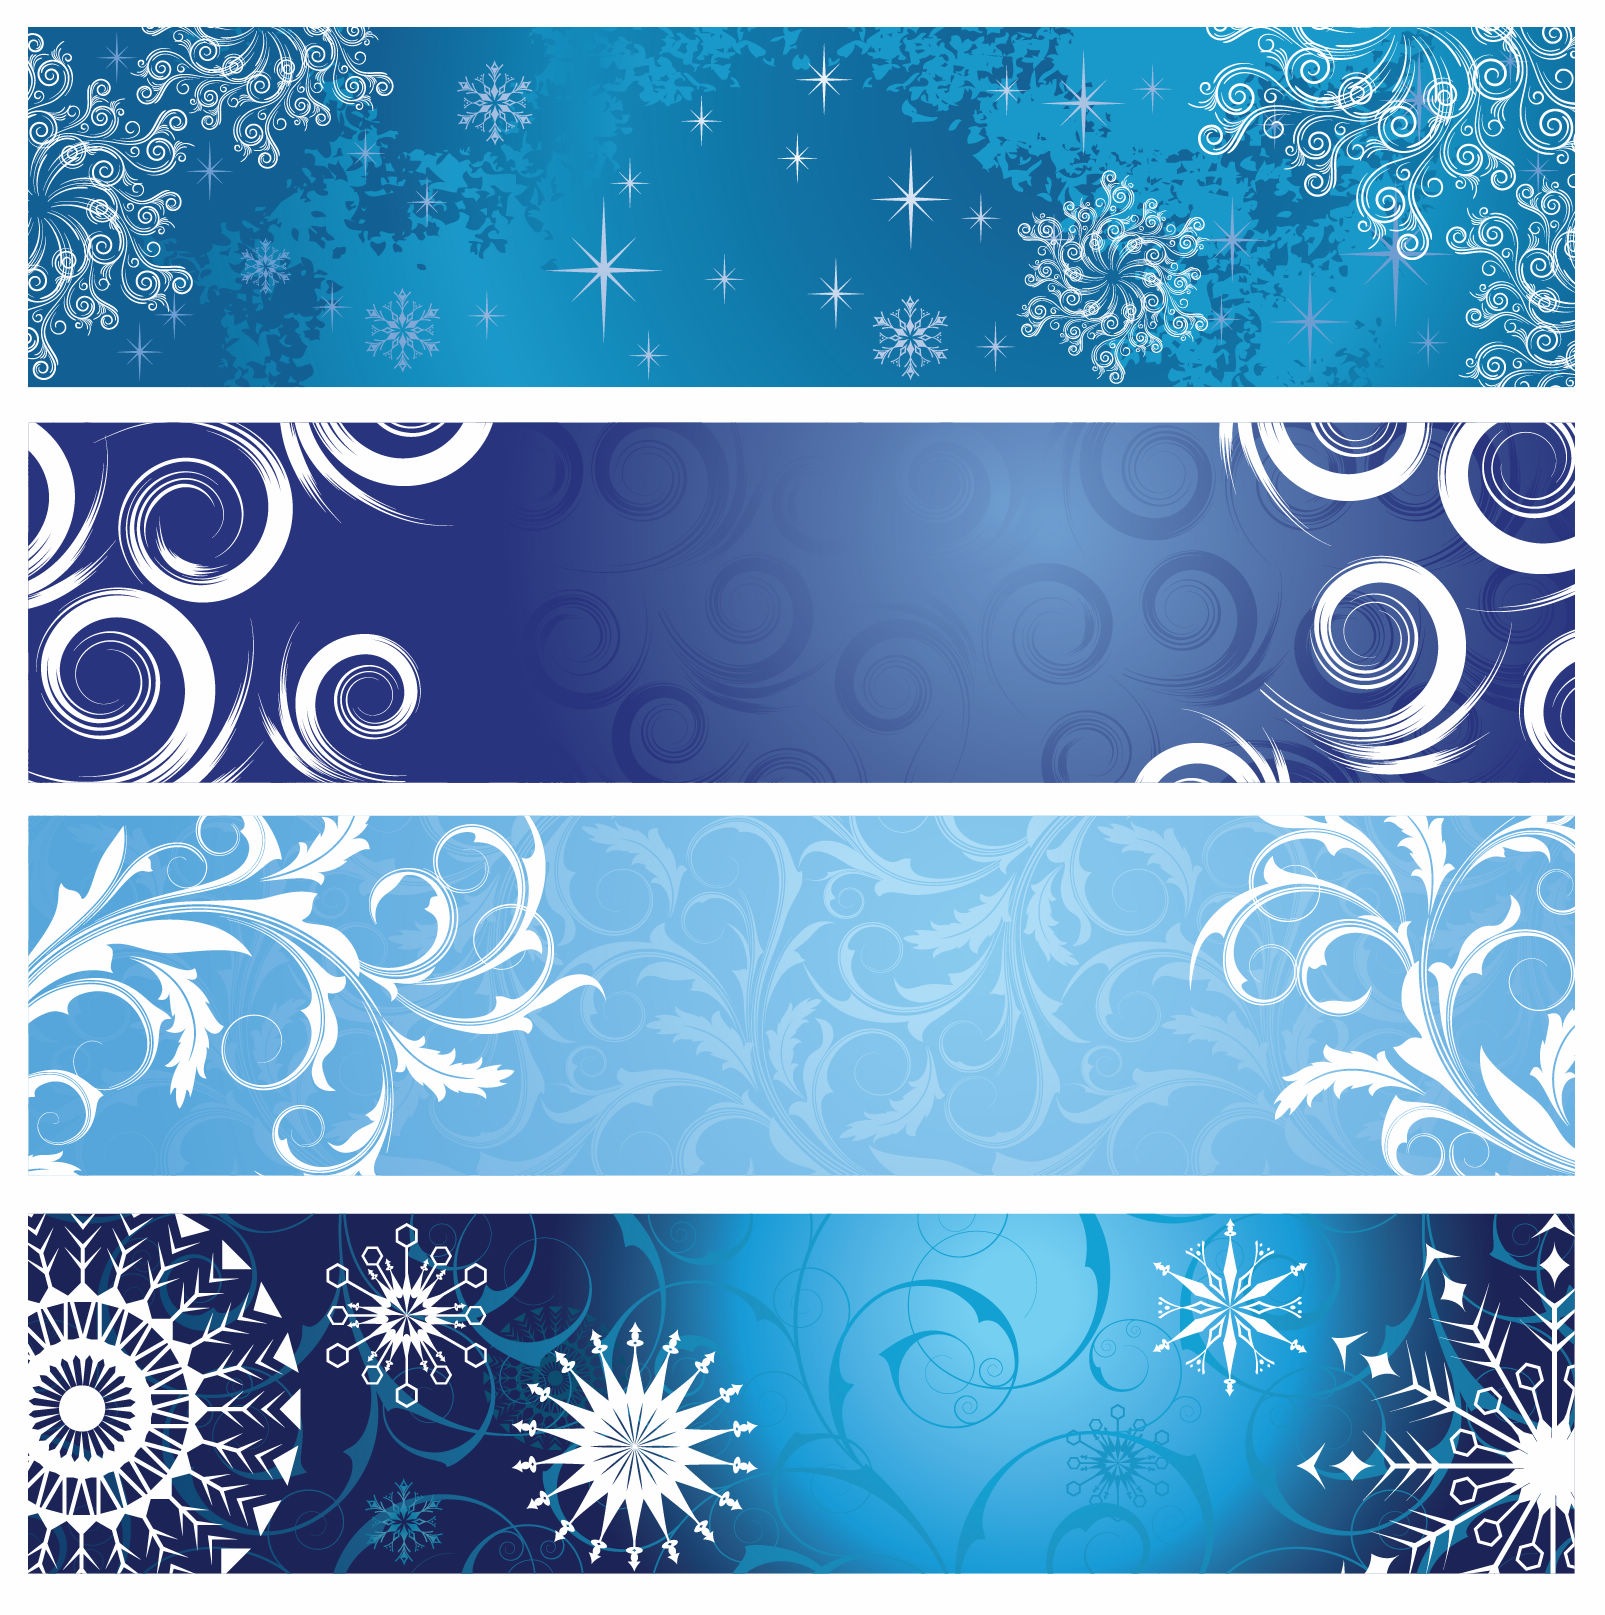 Vector Christmas Banners With Snowflakes   Free Vector Graphics   All